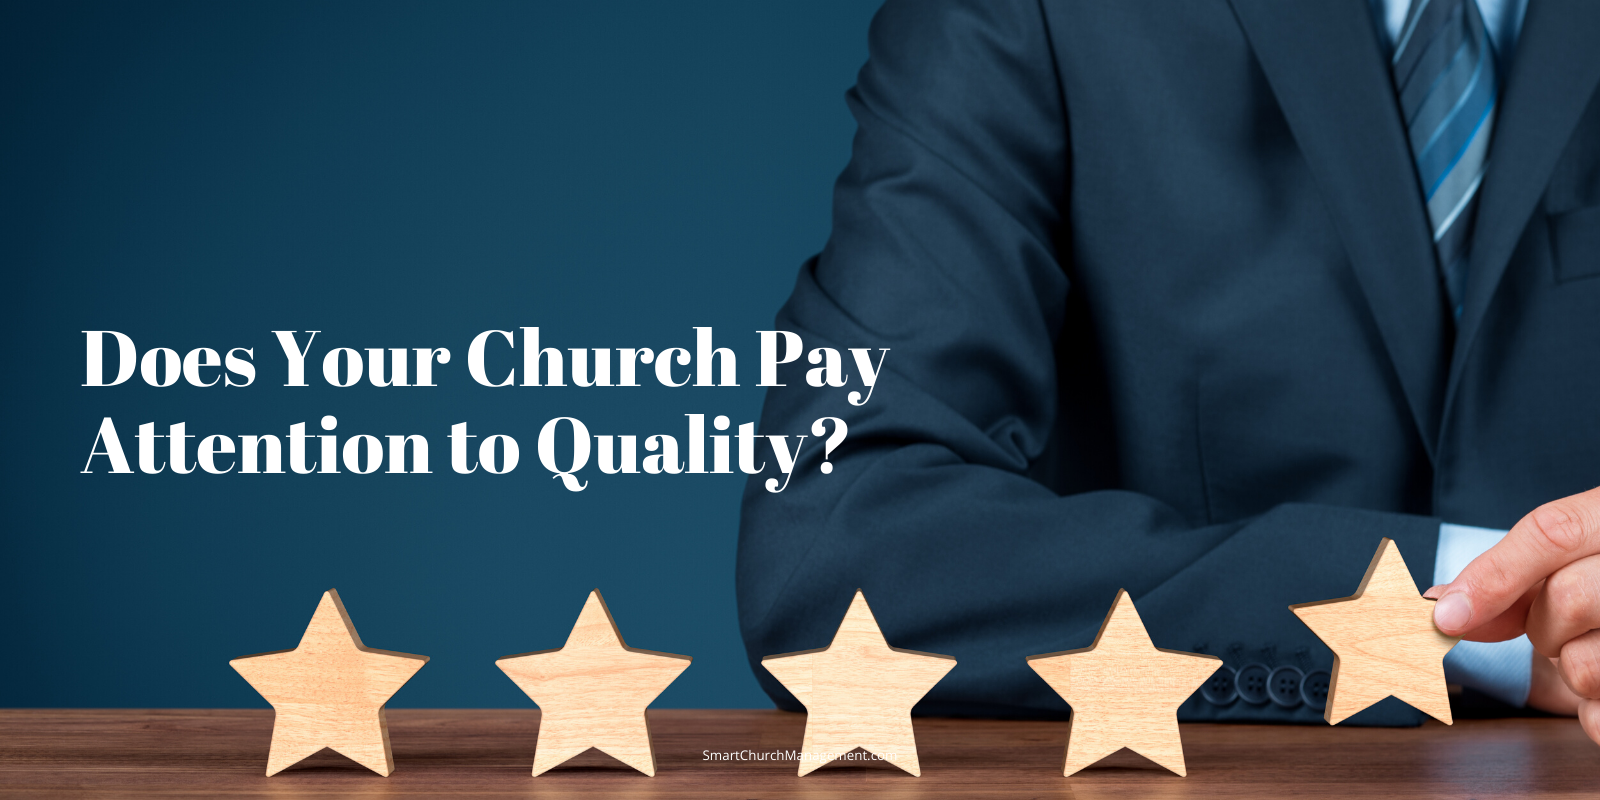 Does your church pay attention to quality